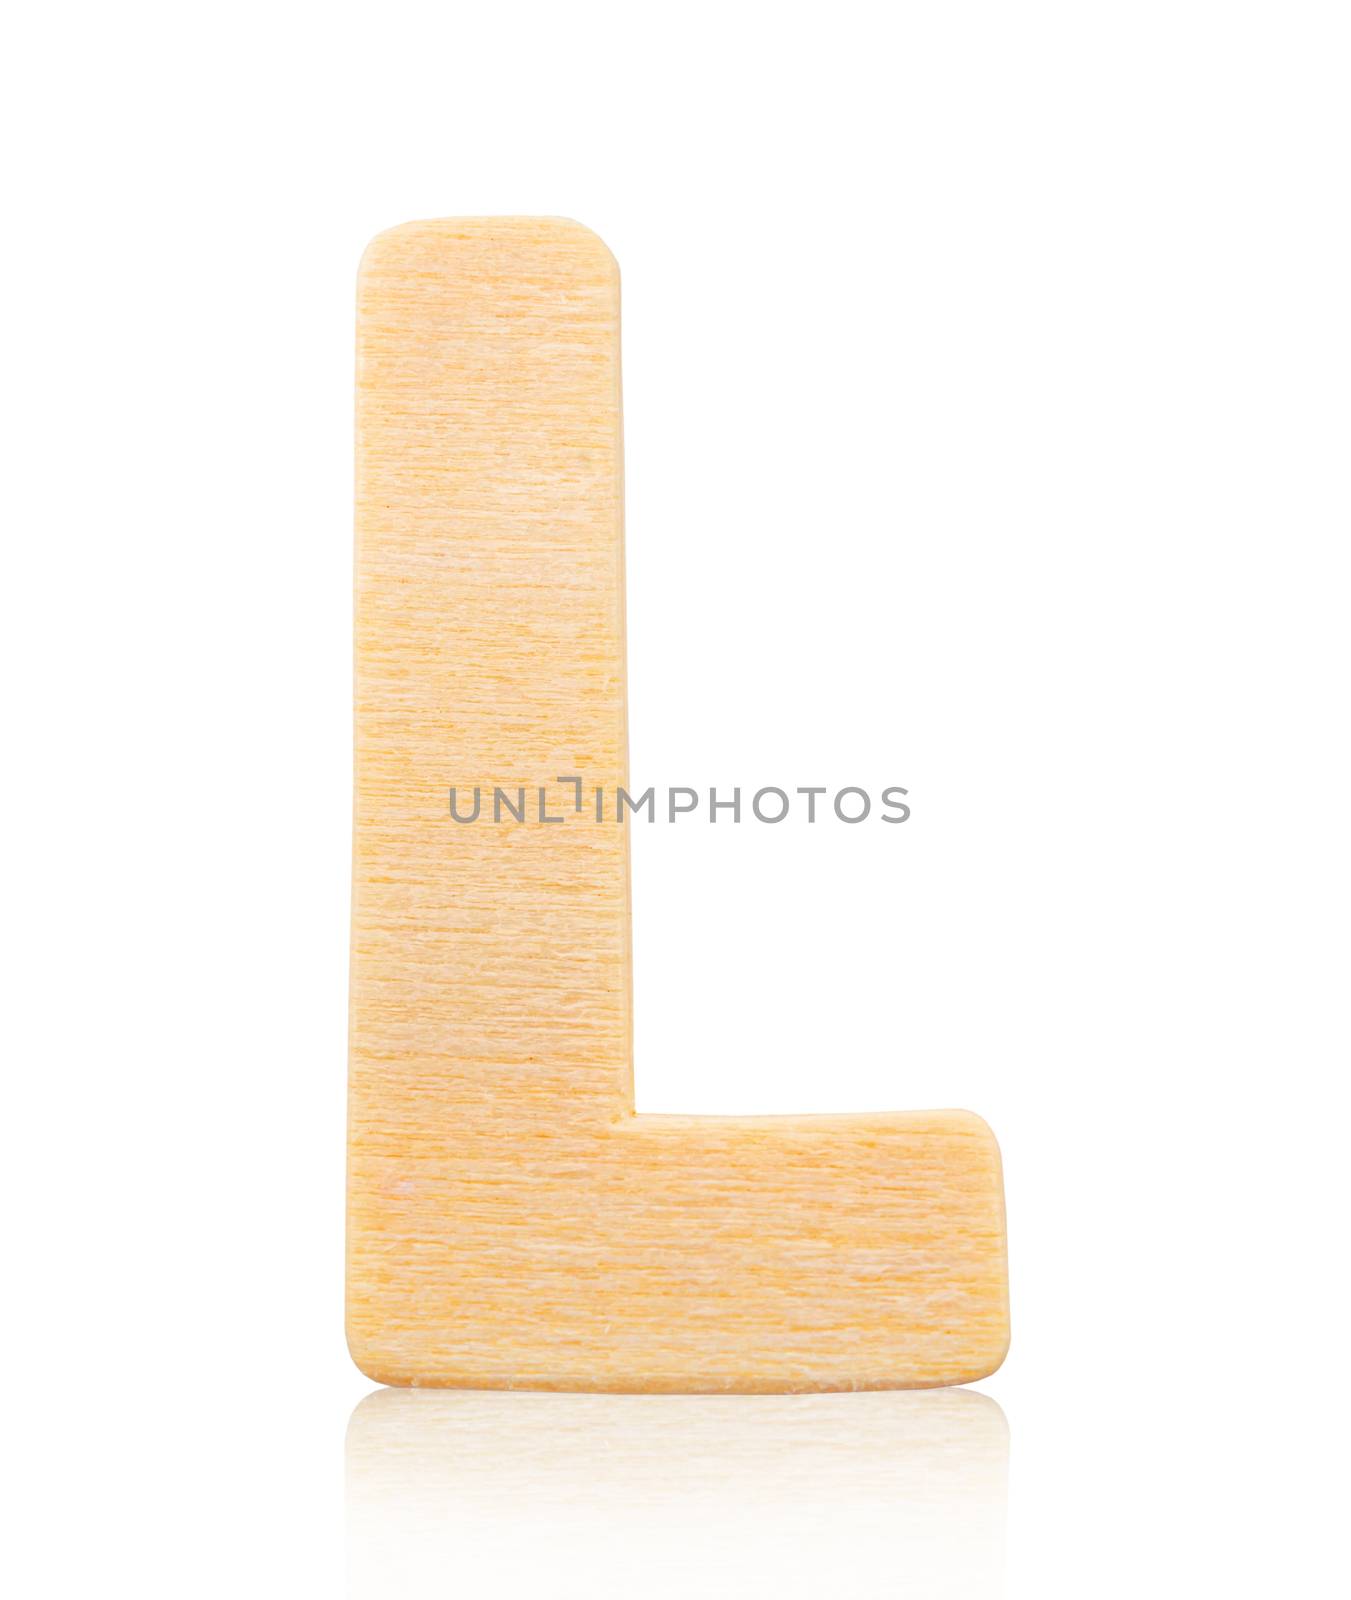 Single capital block wooden letter L isolated on white background, Save clipping path.